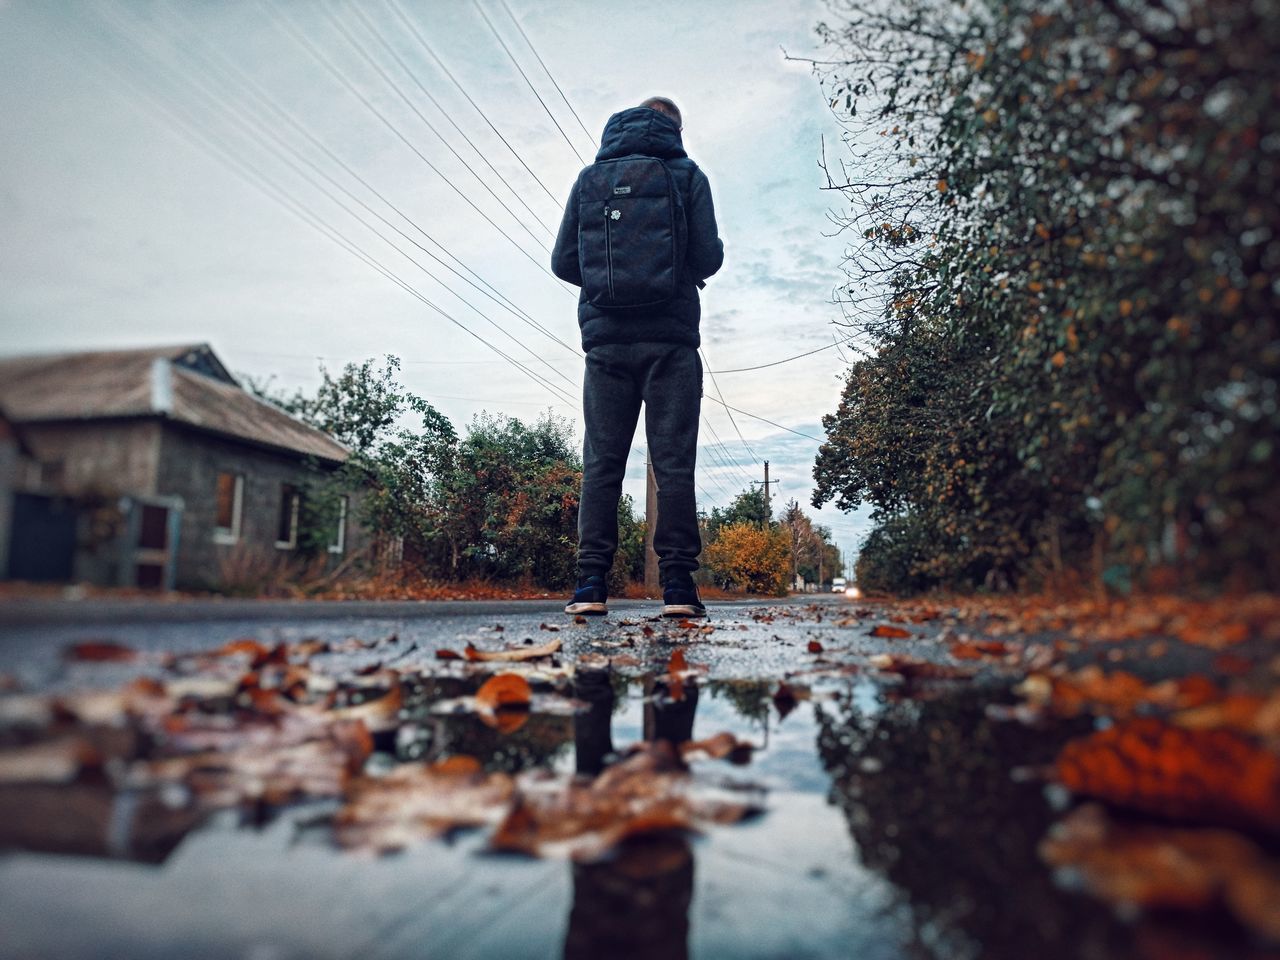 REAR VIEW OF MAN STANDING ON PUDDLE